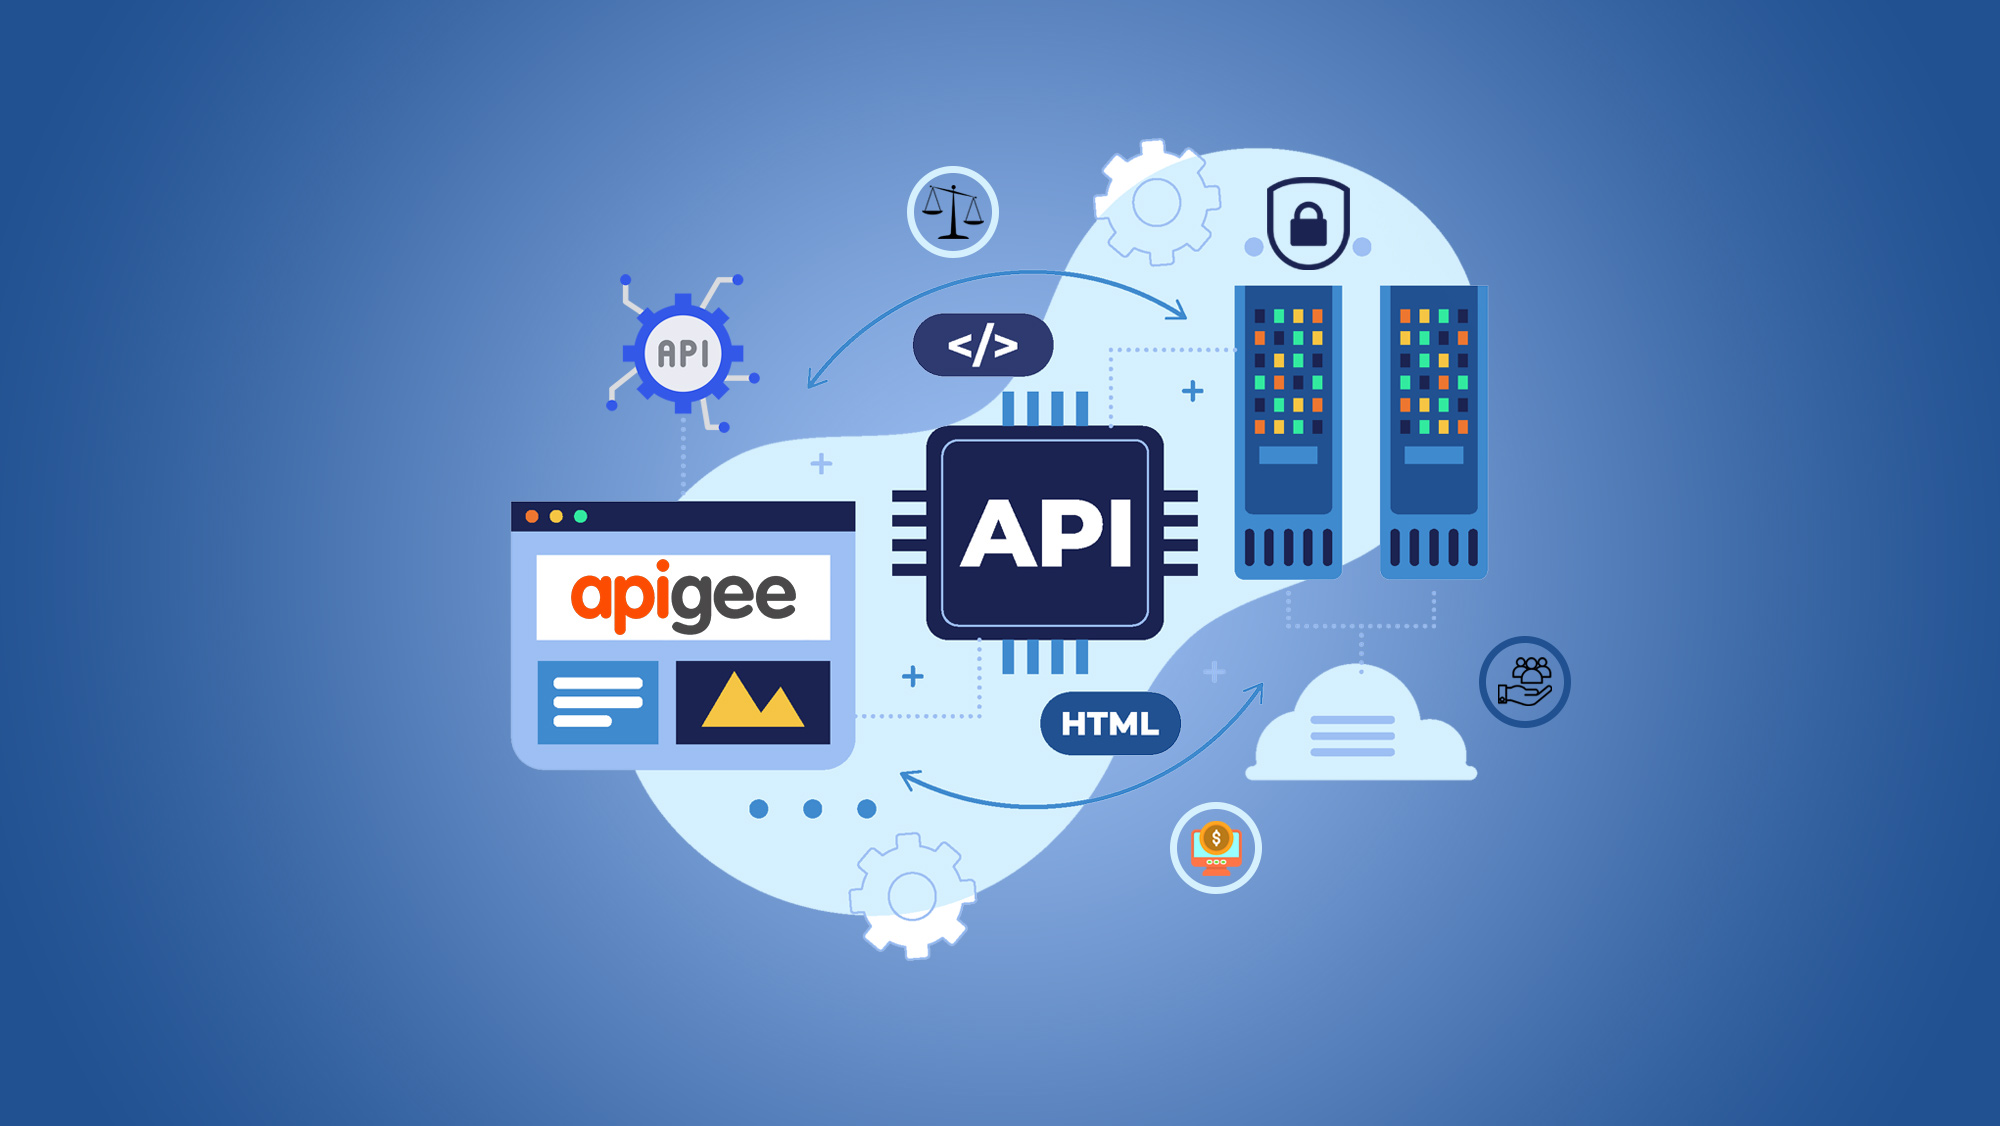 5 Benefits of Using Apigee API Management for Your Business